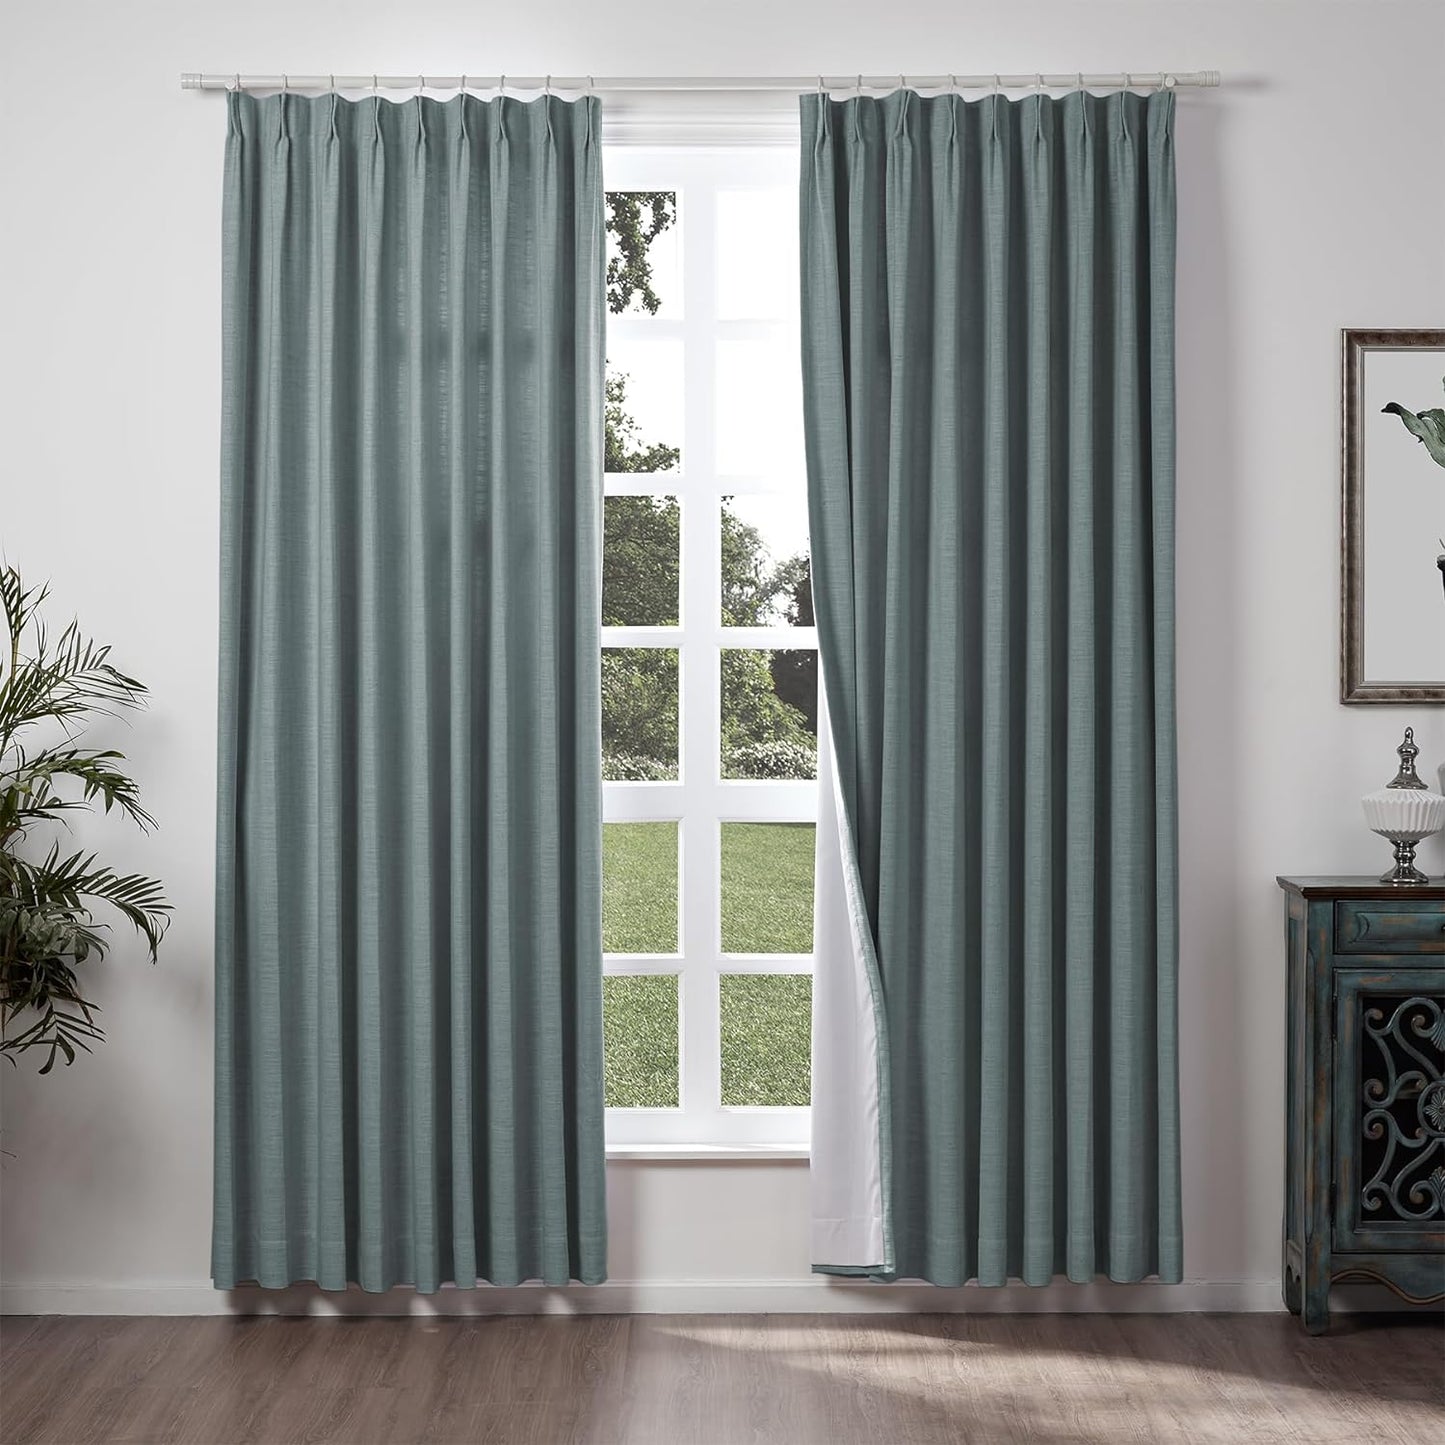 Chadmade 50" W X 63" L Polyester Linen Drape with Blackout Lining Pinch Pleat Curtain for Sliding Door Patio Door Living Room Bedroom, (1 Panel) Sand Beige Tallis Collection  ChadMade Dark Grey (17) 72Wx84L 